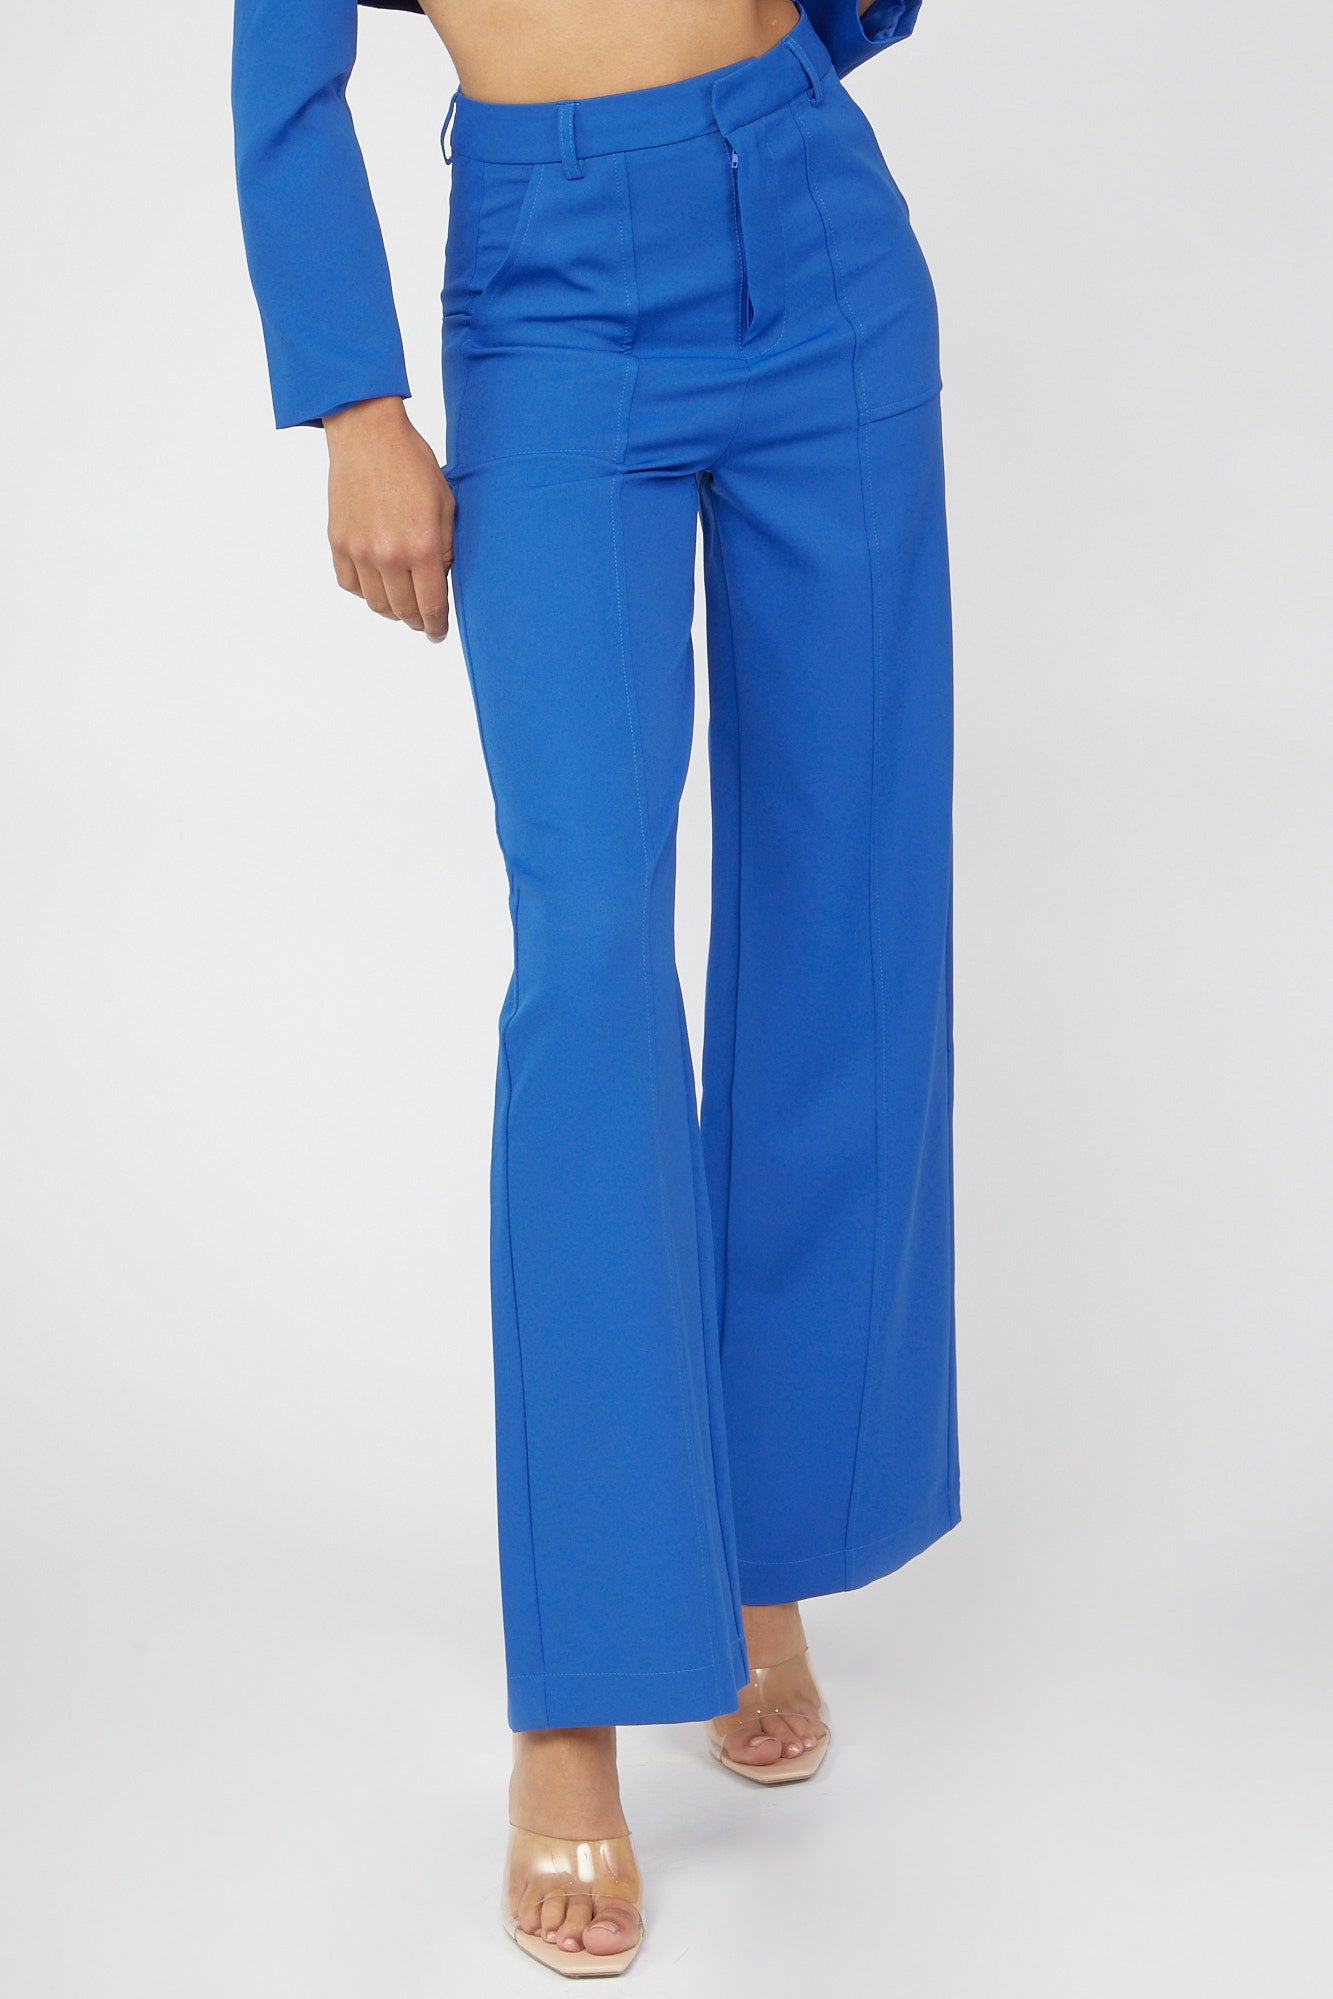 Hallie High Rise Flare Dress Pants Royal – Spoiled Rotten, 40% OFF